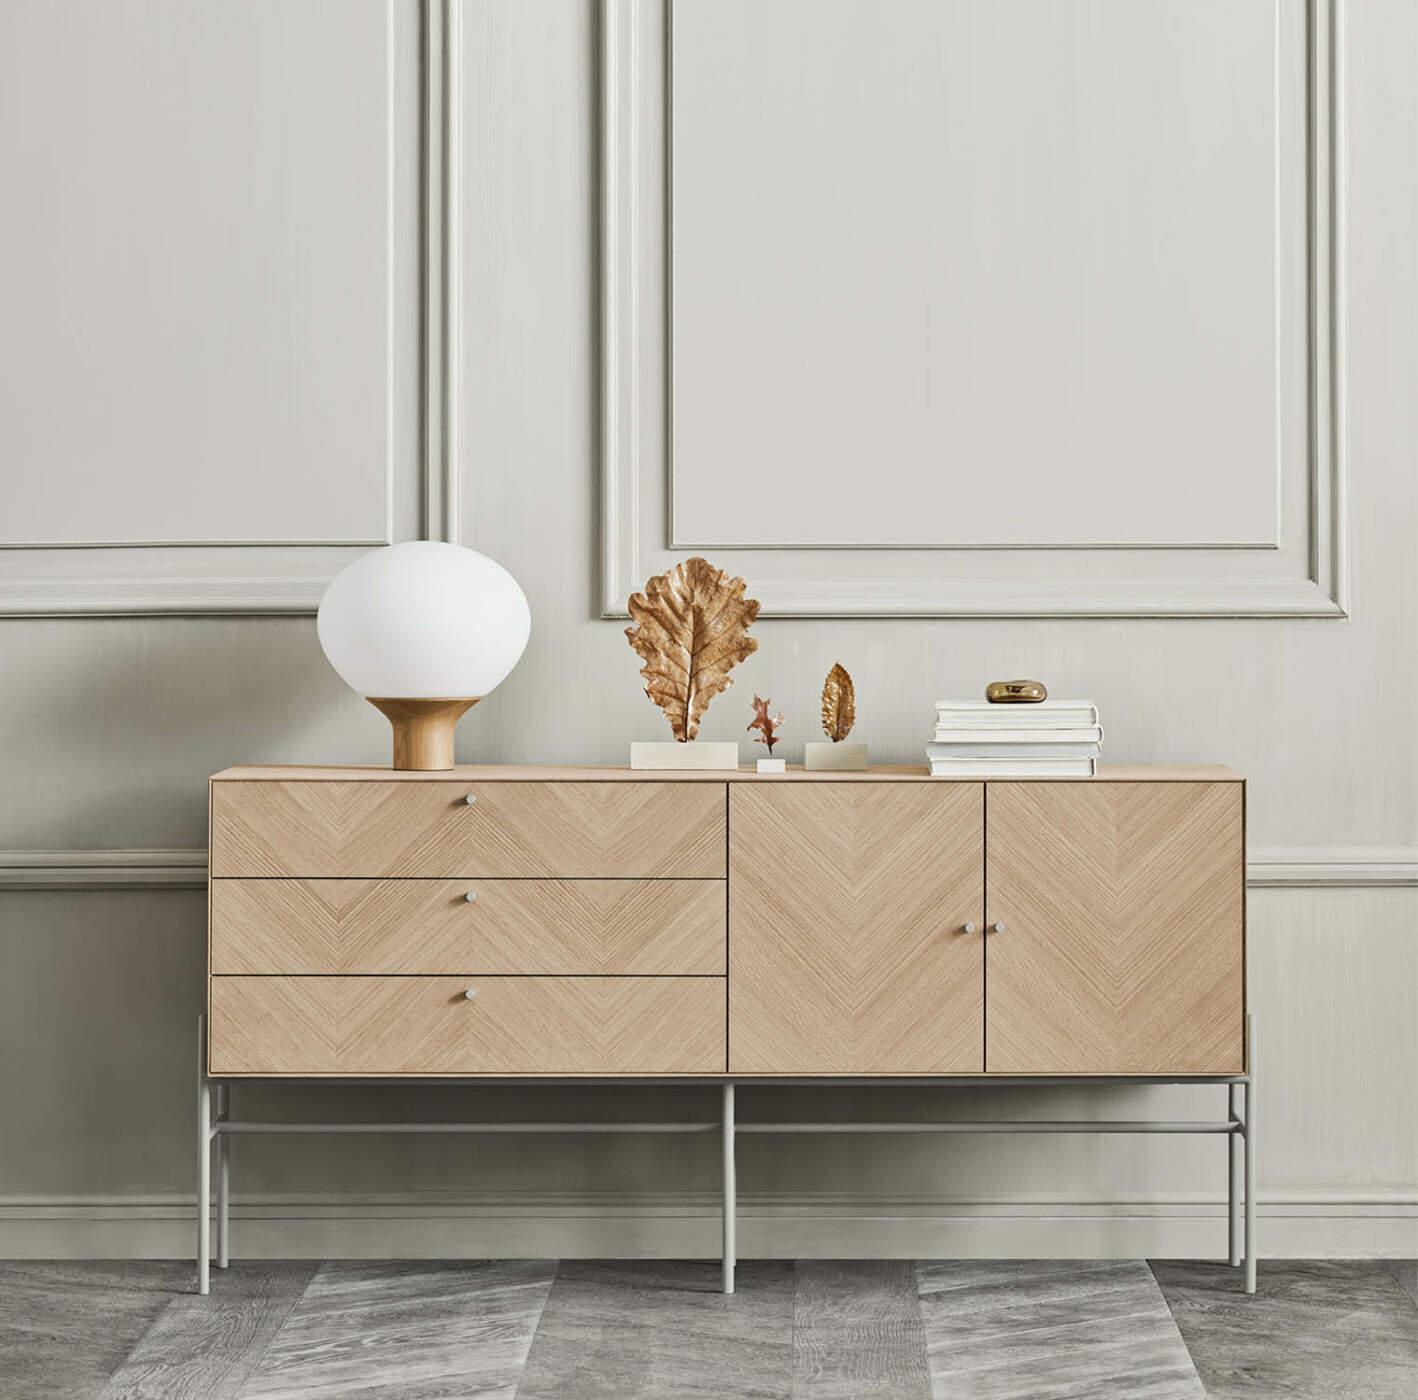 Bolia Luxe sideboard // Luxe tálaló komód